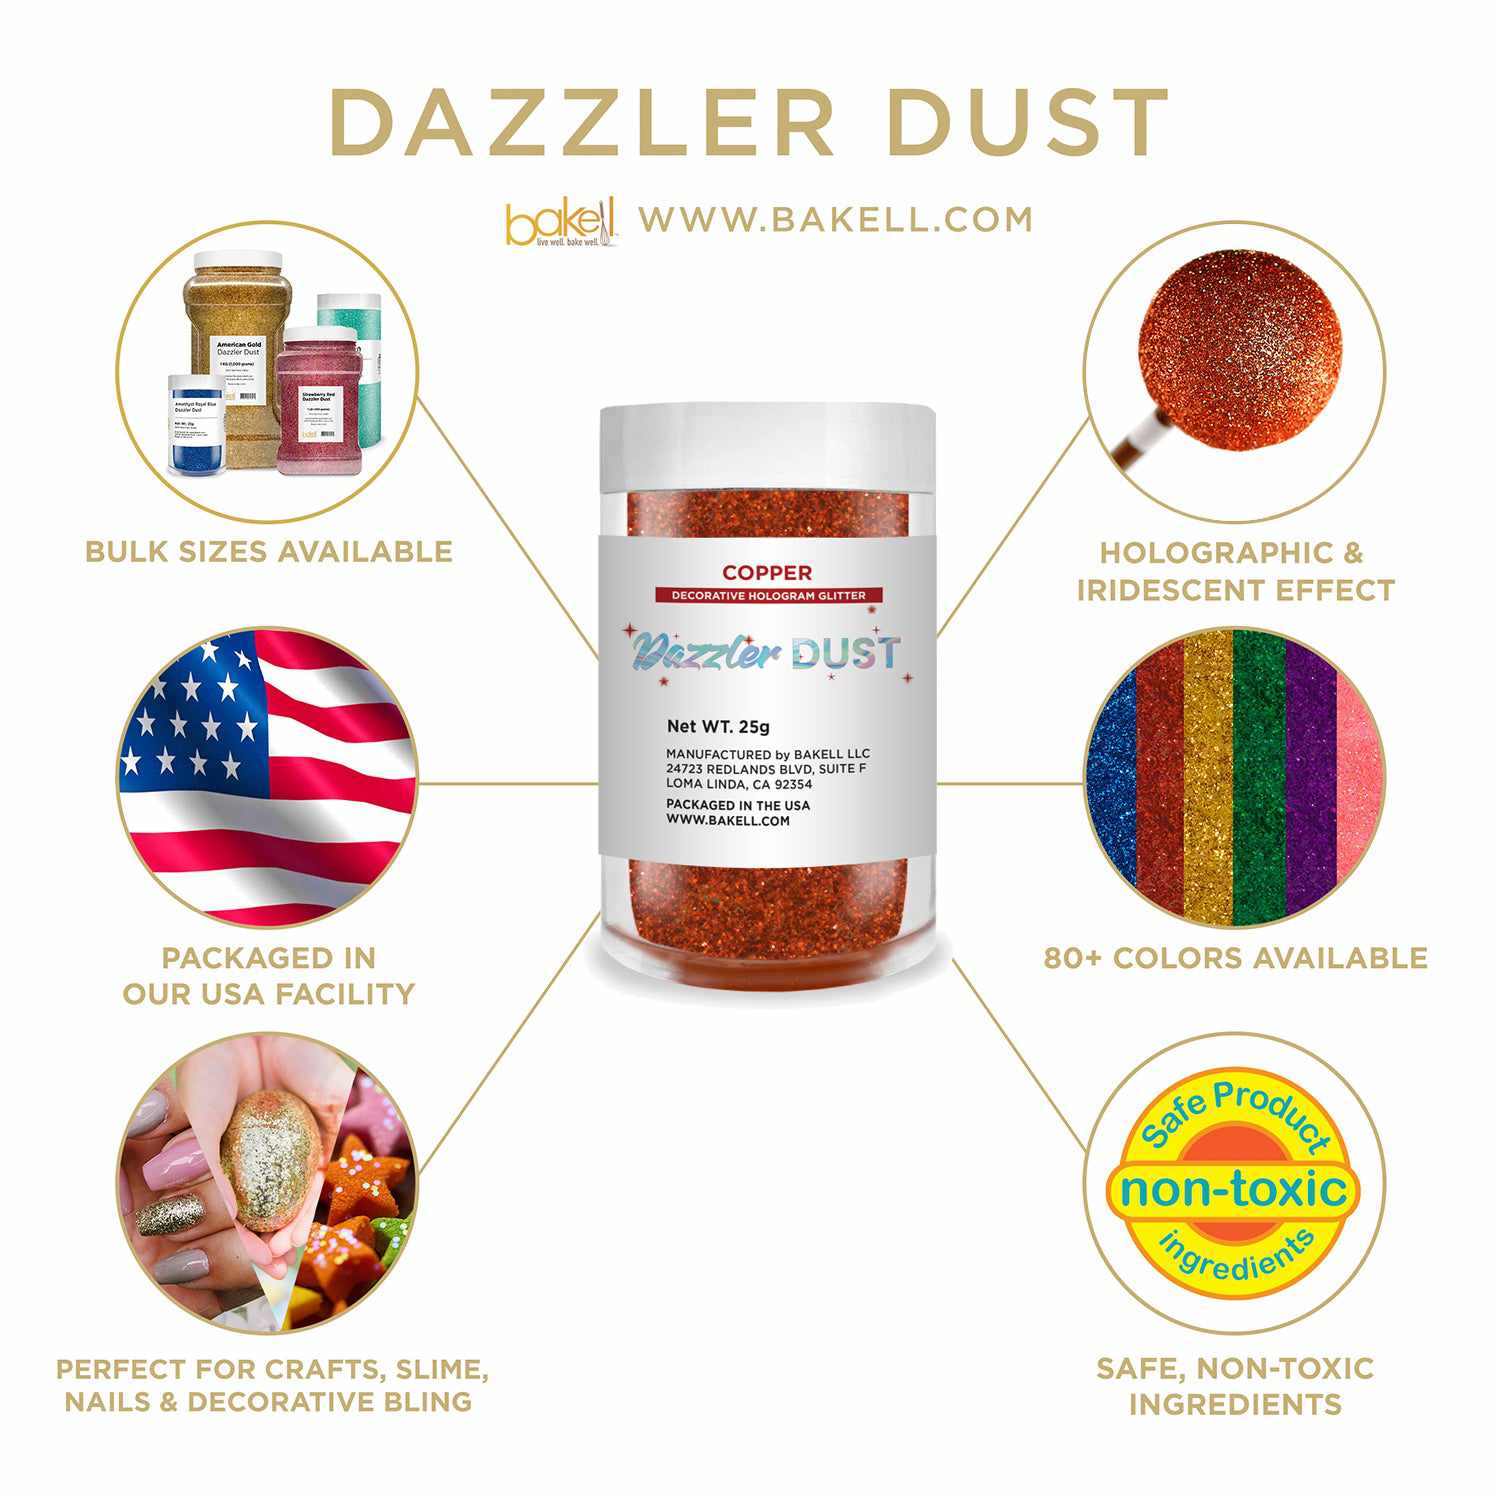 Dazzler Dust | Non Toxic Holographic Decorating & Craft Glitter | Bakell.com